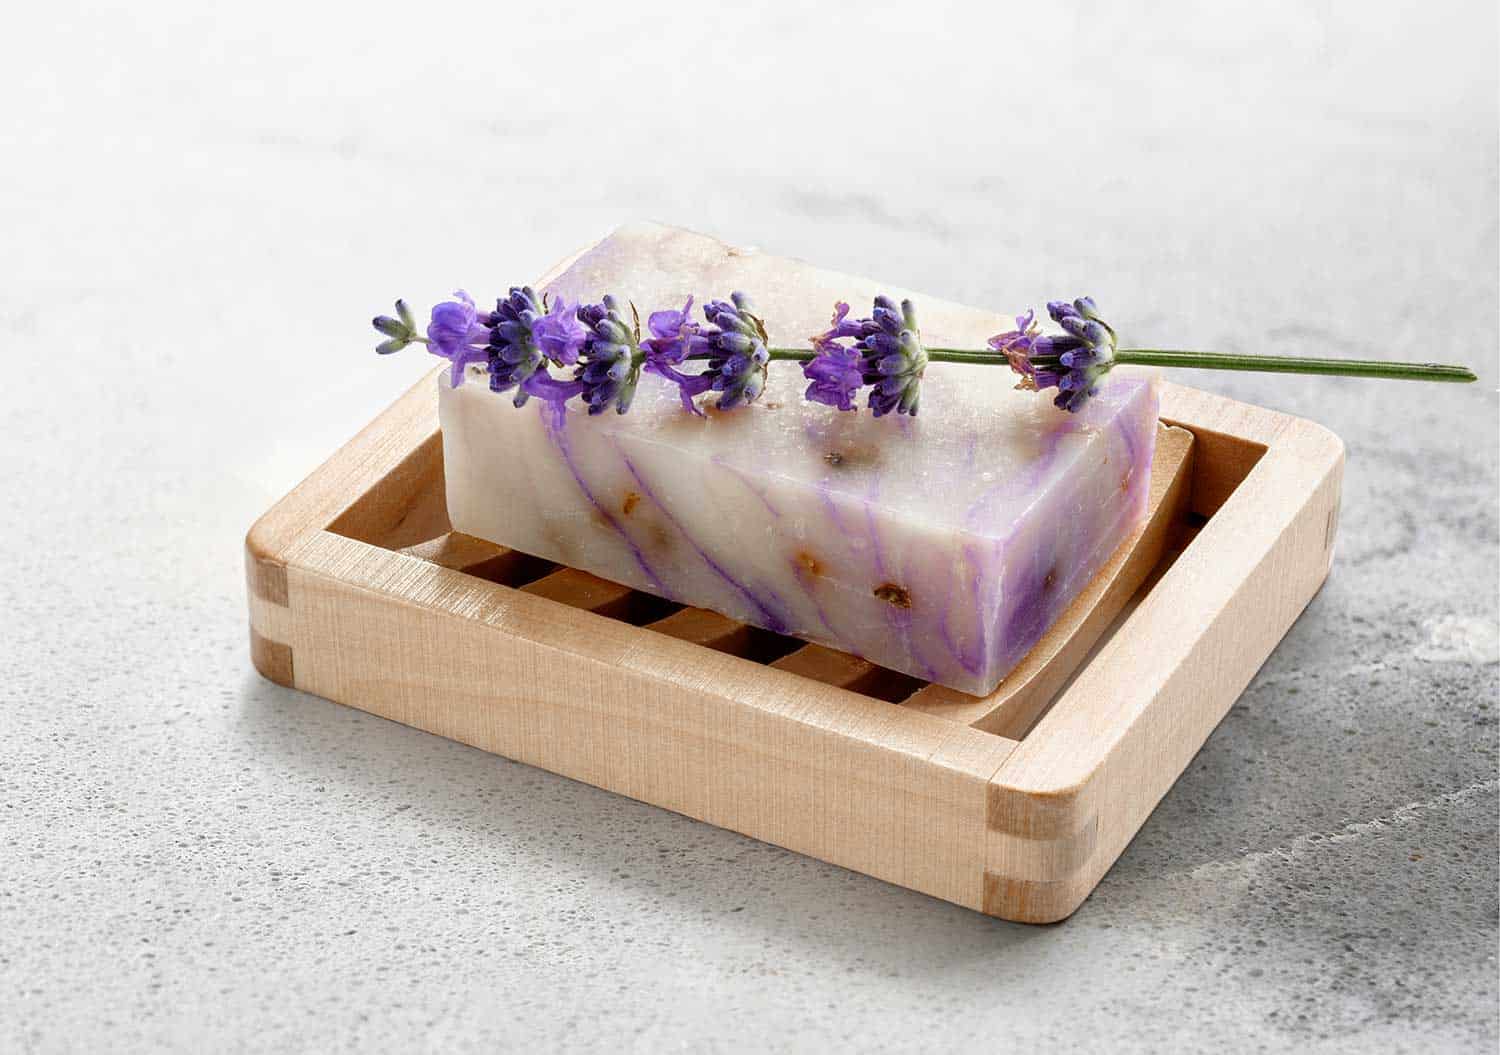 Homemade lavender soap on wooden soap dish on marble table